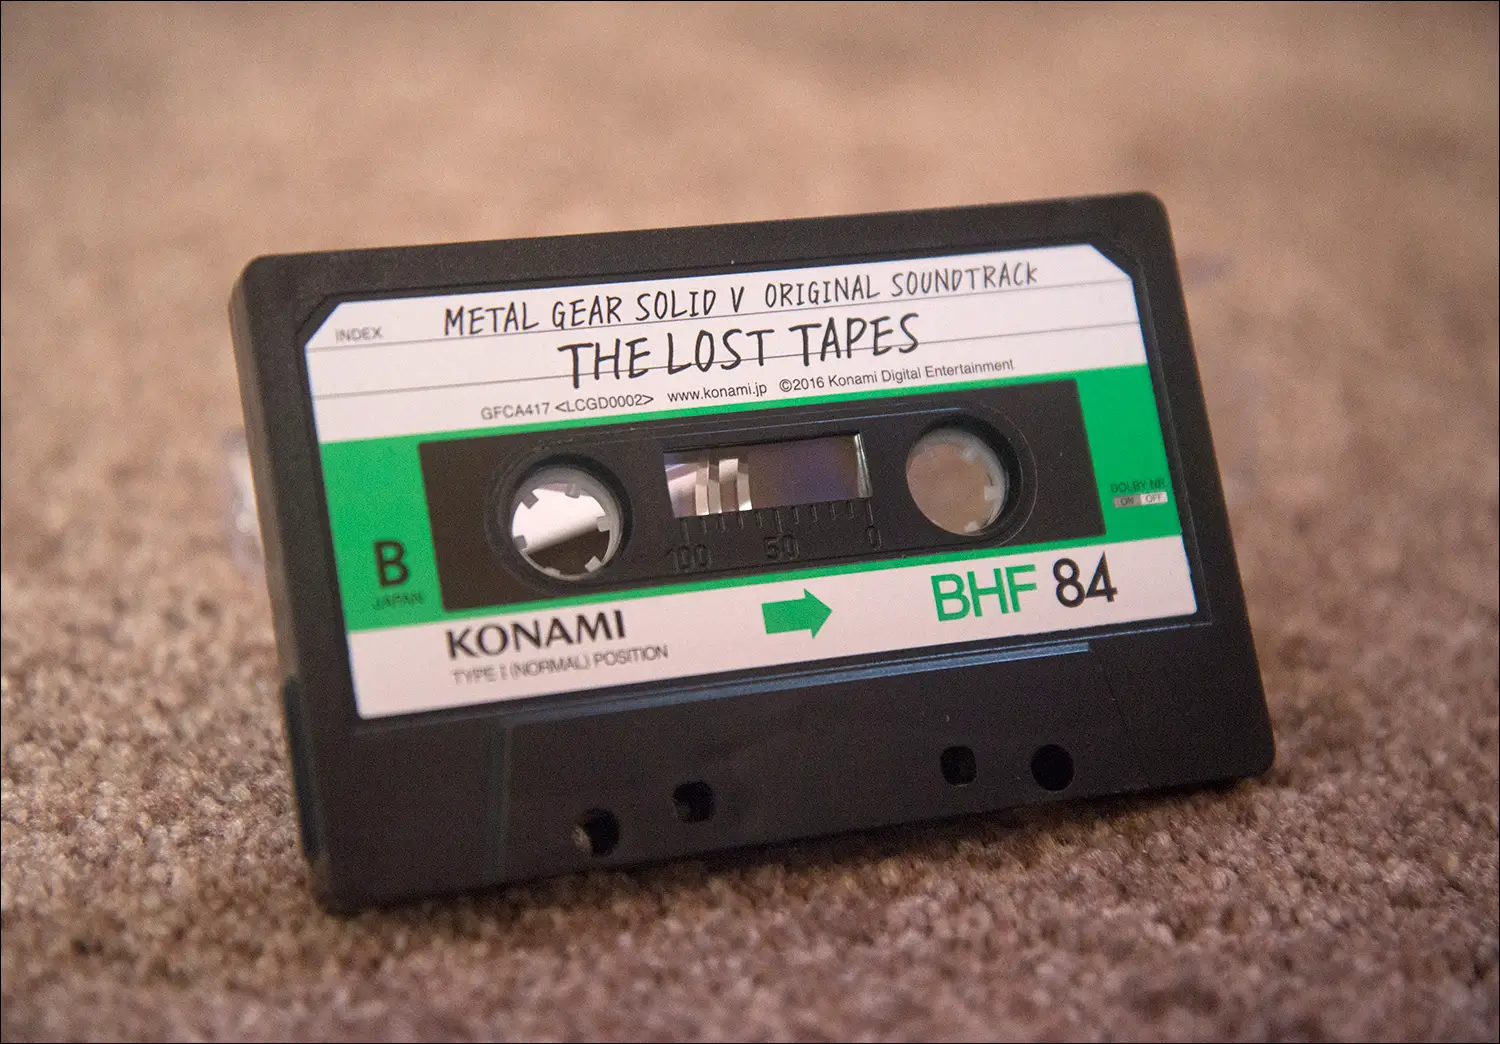 Metal-Gear-Solid-V-The-Lost-Tapes-Casset